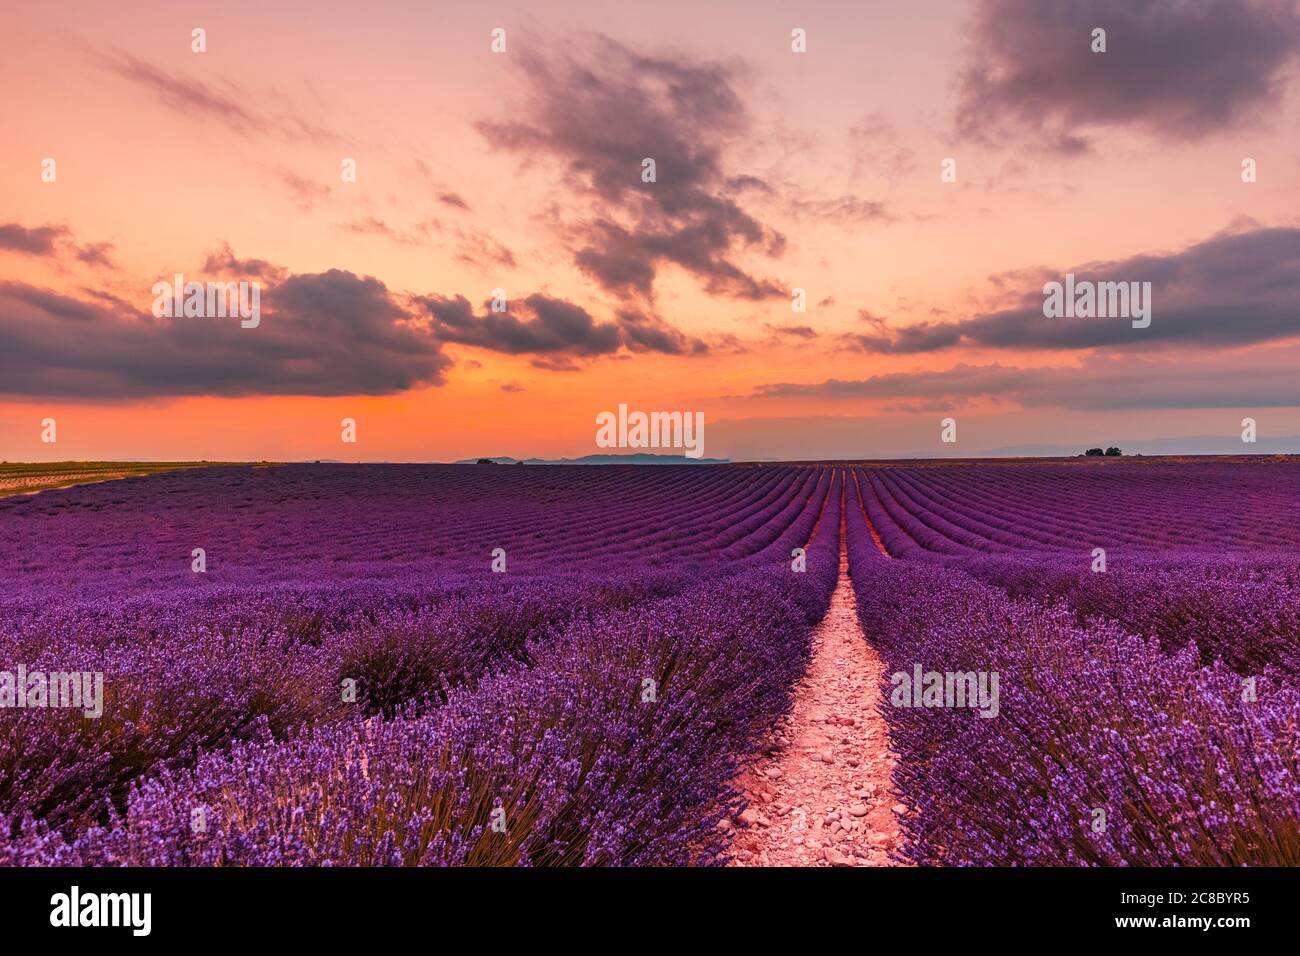 Stunning landscape with lavender field at sunset. Beautiful landscape of lavender field with setting sun and orange sky Stock Photo